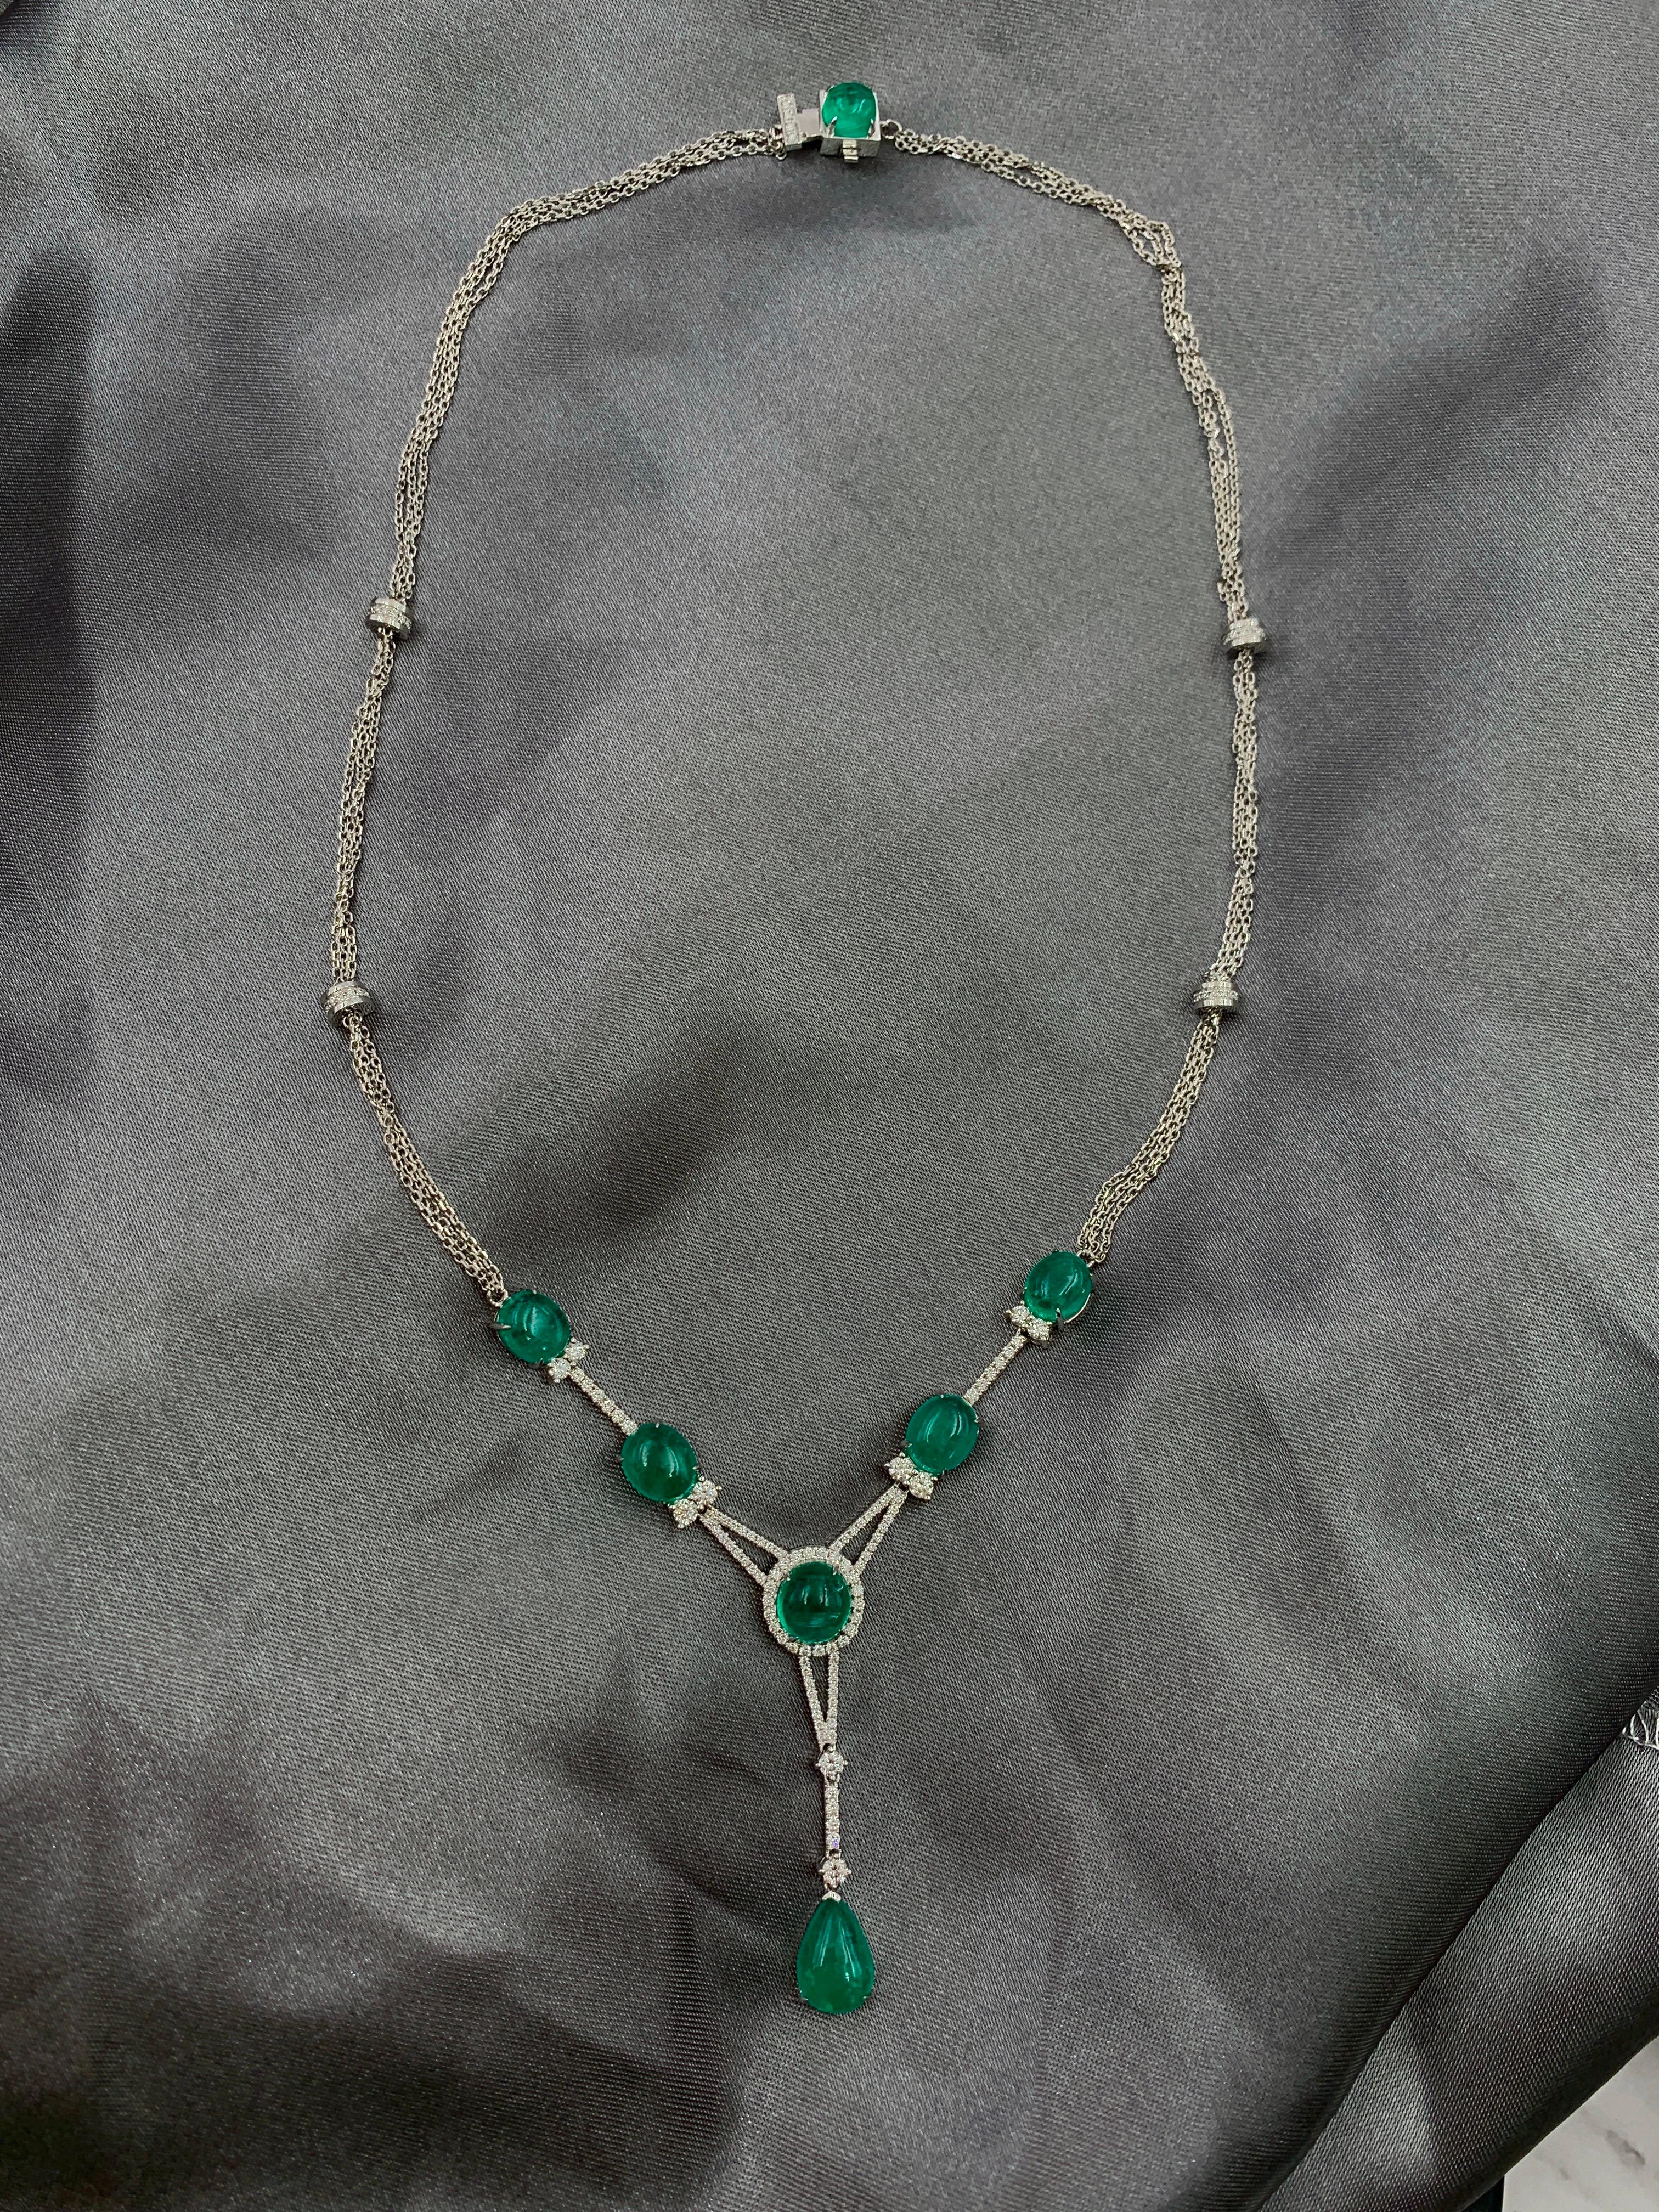 The design of this Emerald necklace is very contemporary and focus on maximizing the occasions it can be worn.  Emerald necklaces are generally either deviate towards the vintage statement pieces or very simple pendant like style. Our focus here is